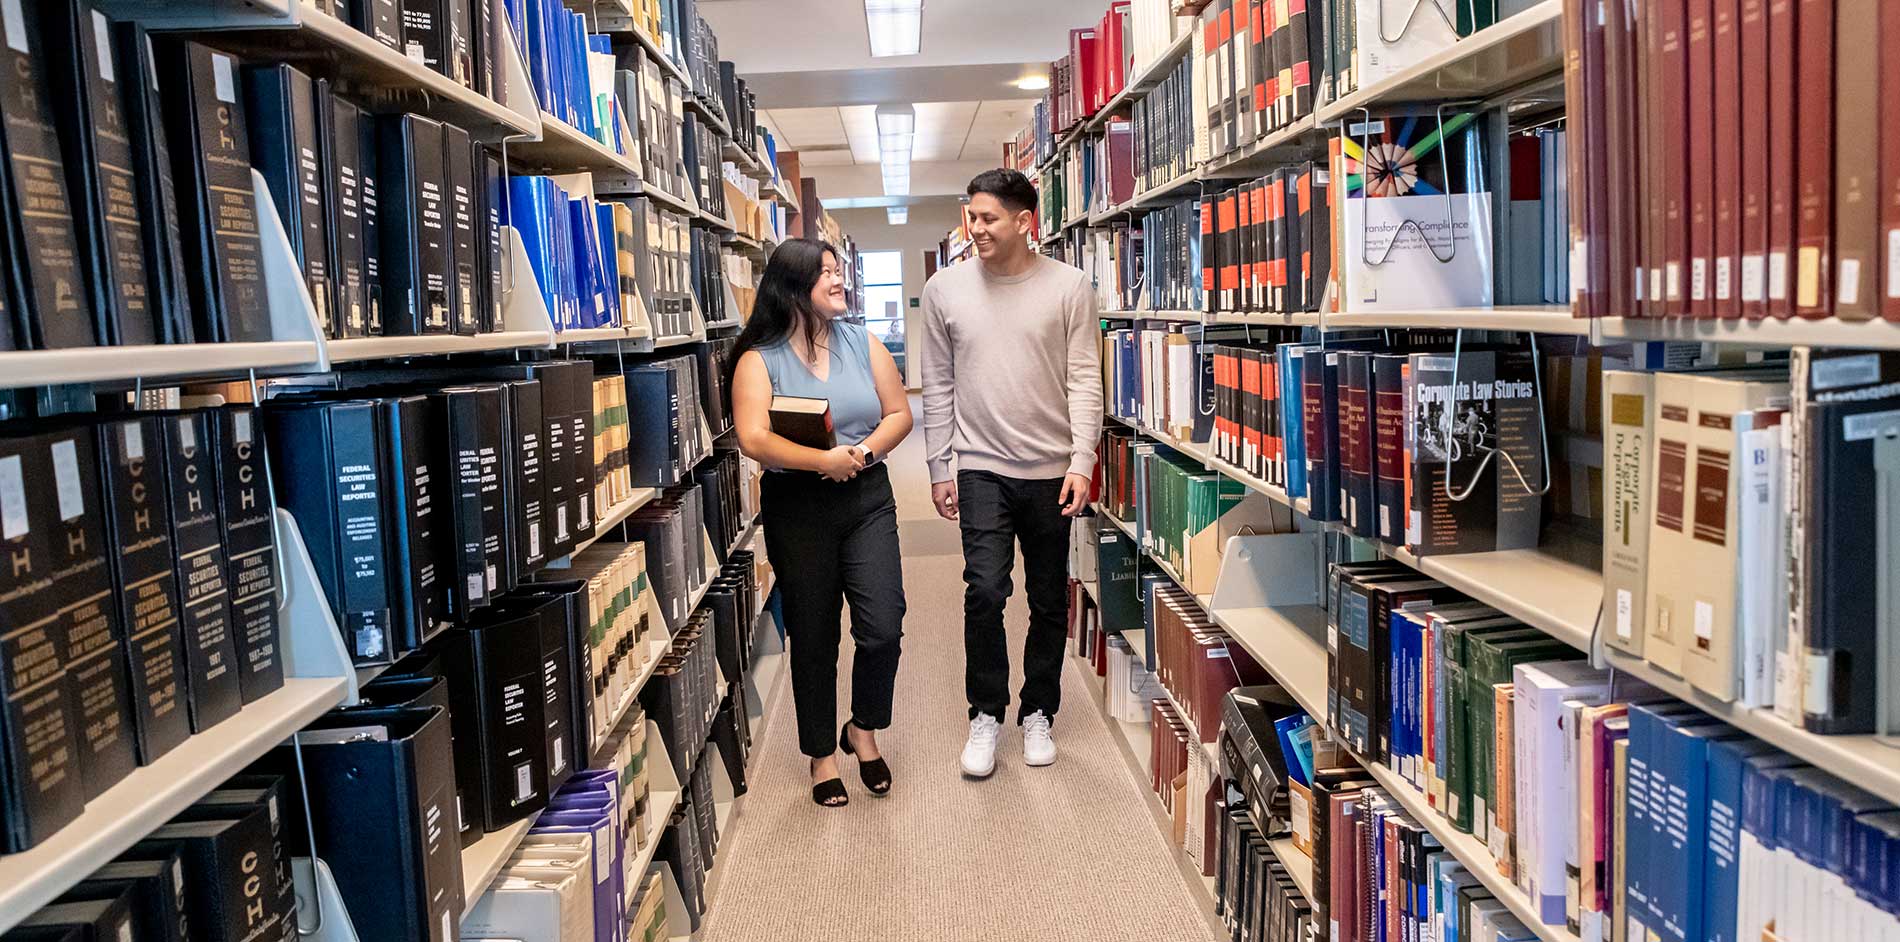 Students walking in library stacks